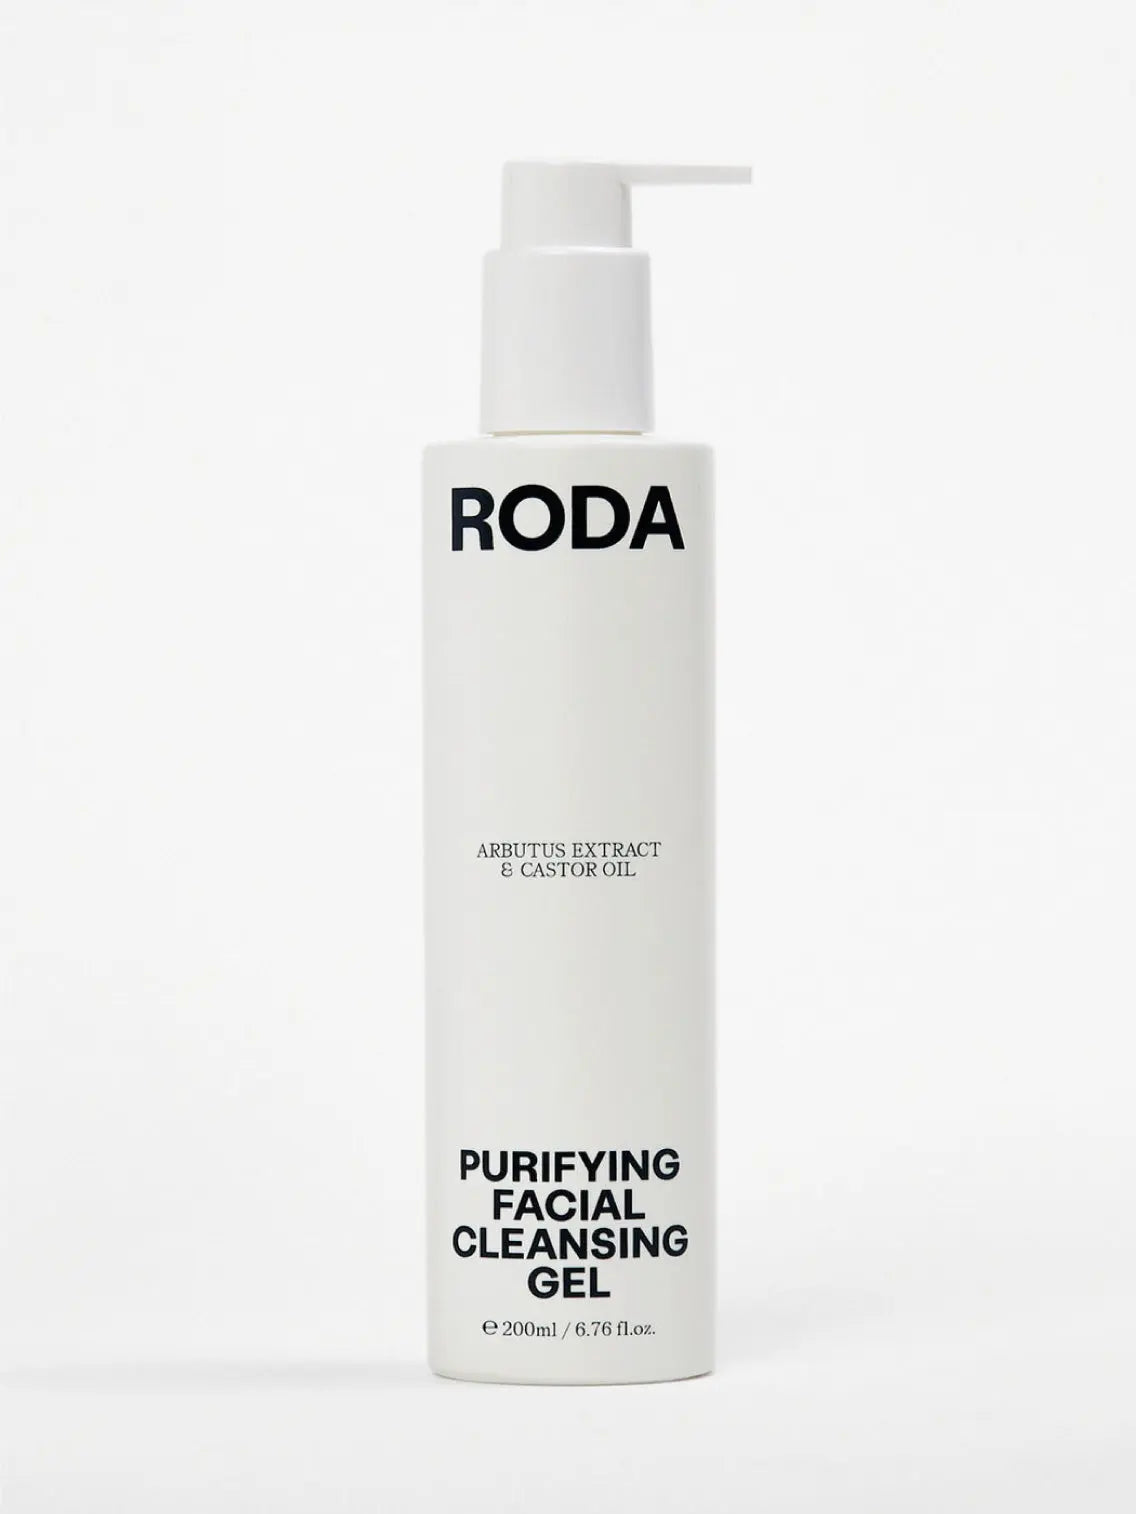 A white pump bottle with a black cap is labeled with "Roda" at the top and "Purifying Facial Cleansing Gel" at the bottom. The text also mentions "Arbutus Extract & Castor Oil." This 200ml (6.76 fl. oz.) product, popular in many Barcelona stores, ensures a thorough cleanse for your skin.